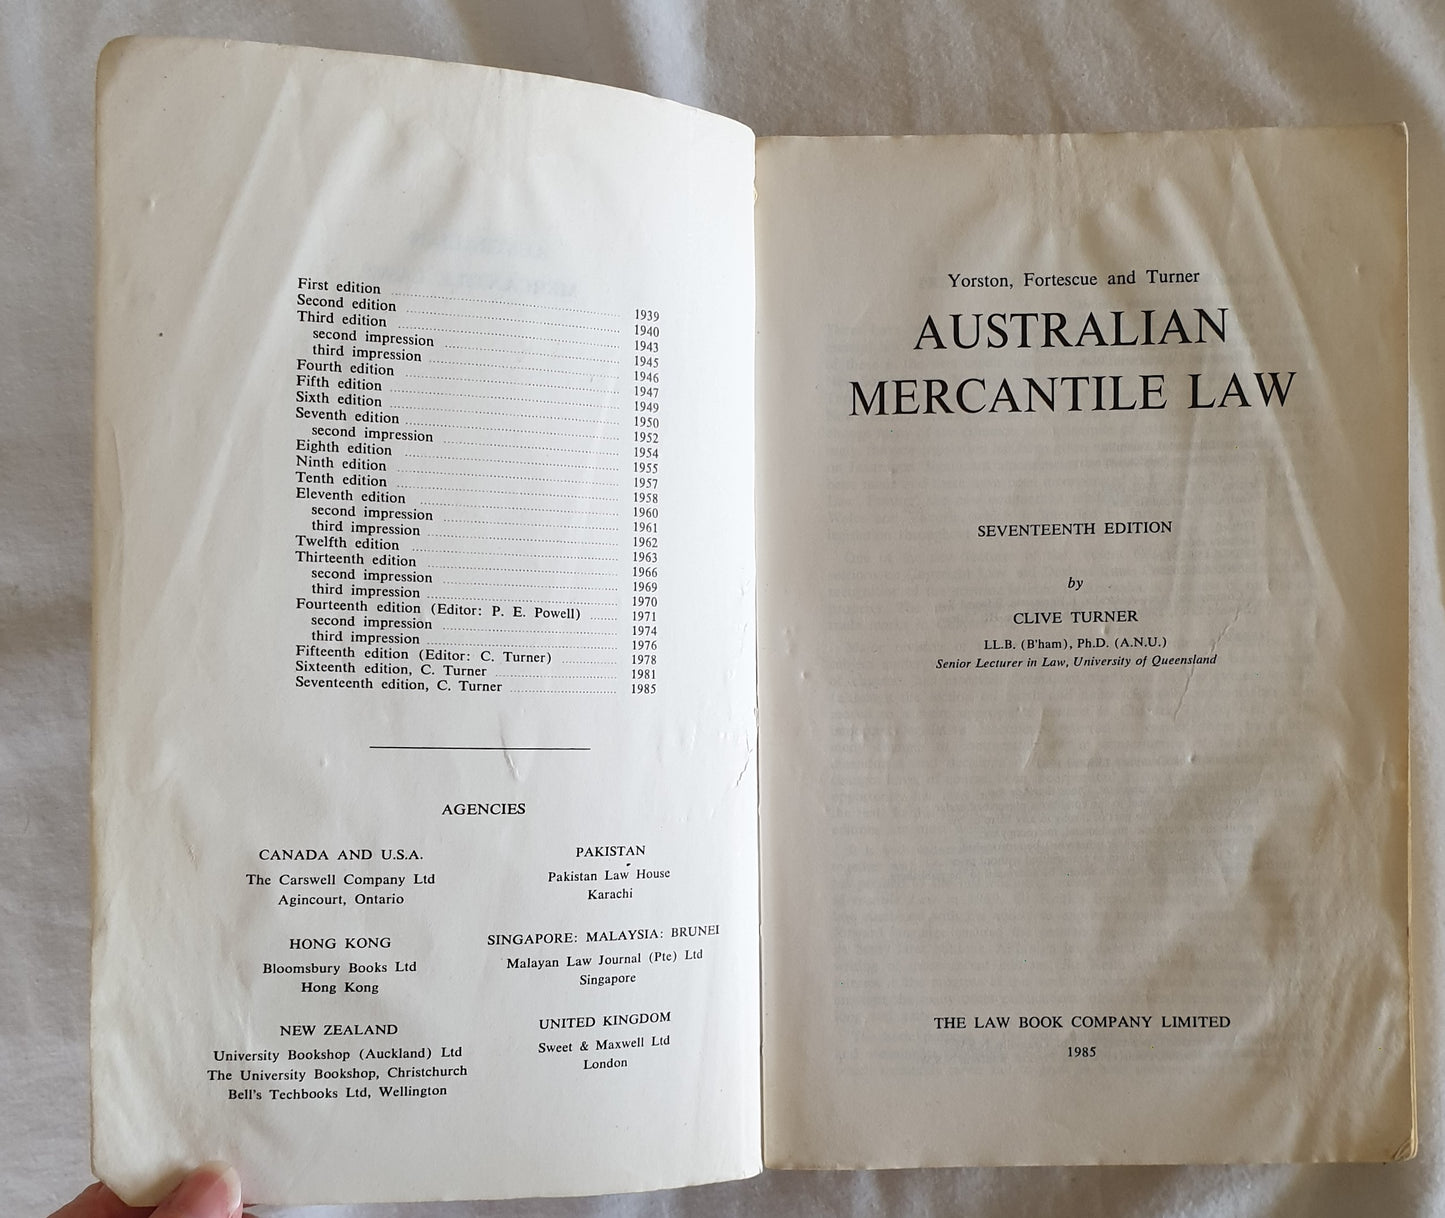 Australian Mercantile Law by Clive Turner